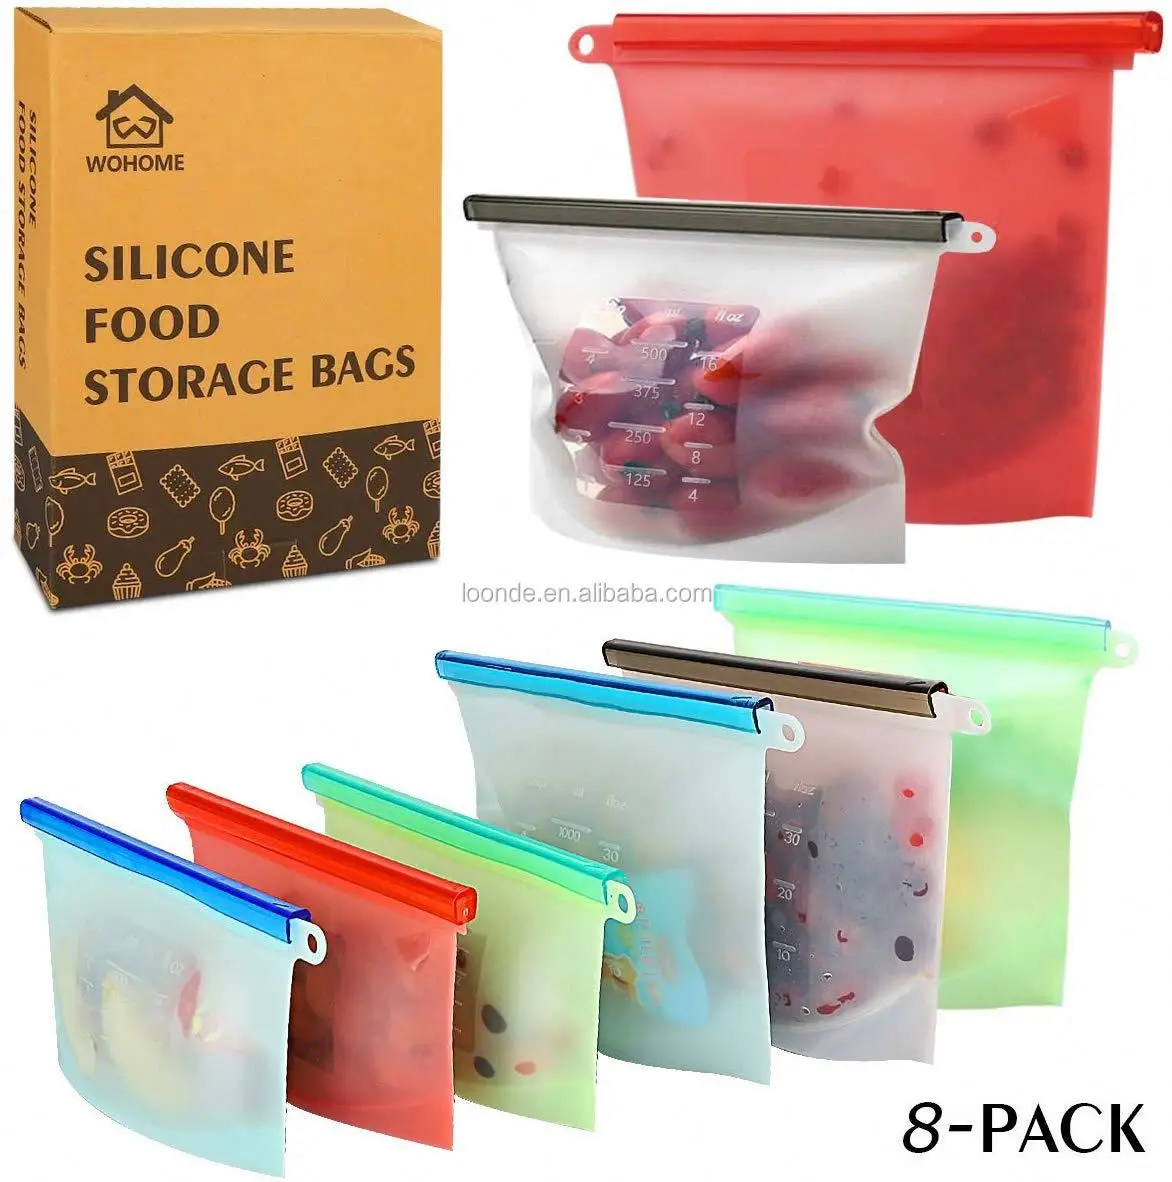 Reusable Gallon Storage Bags - LEAKPROOF  Gallon Freezer Bags for Marinate Meats Snack Sandwich Fruit Cereal Travel Items